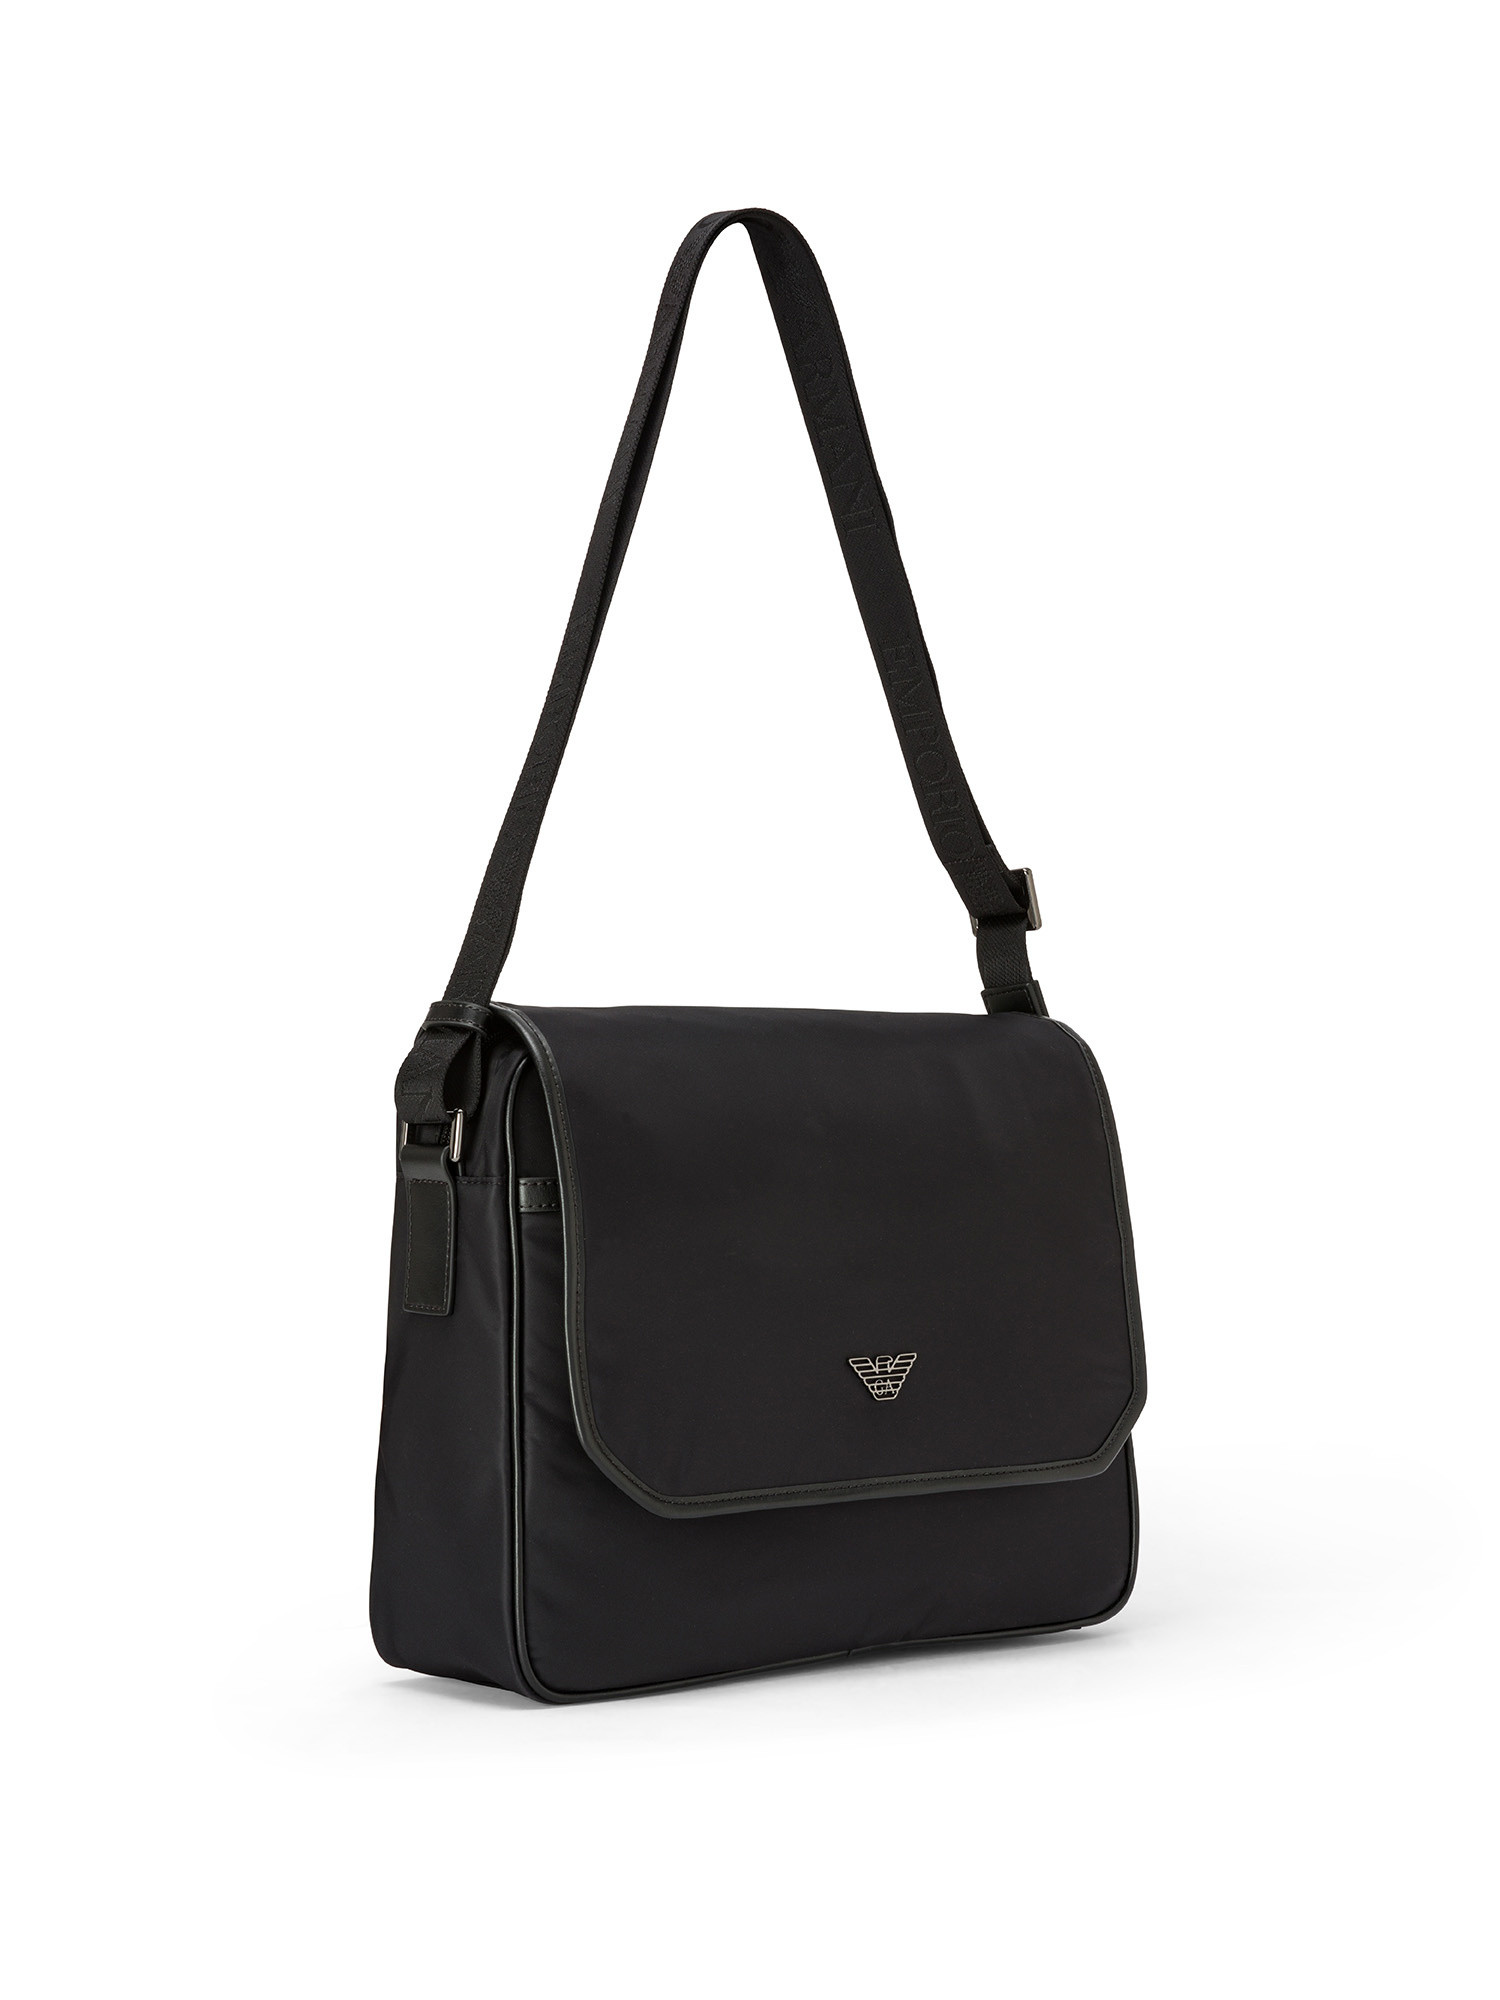 Emporio Armani - Bag in recycled nylon with logo, Black, large image number 1